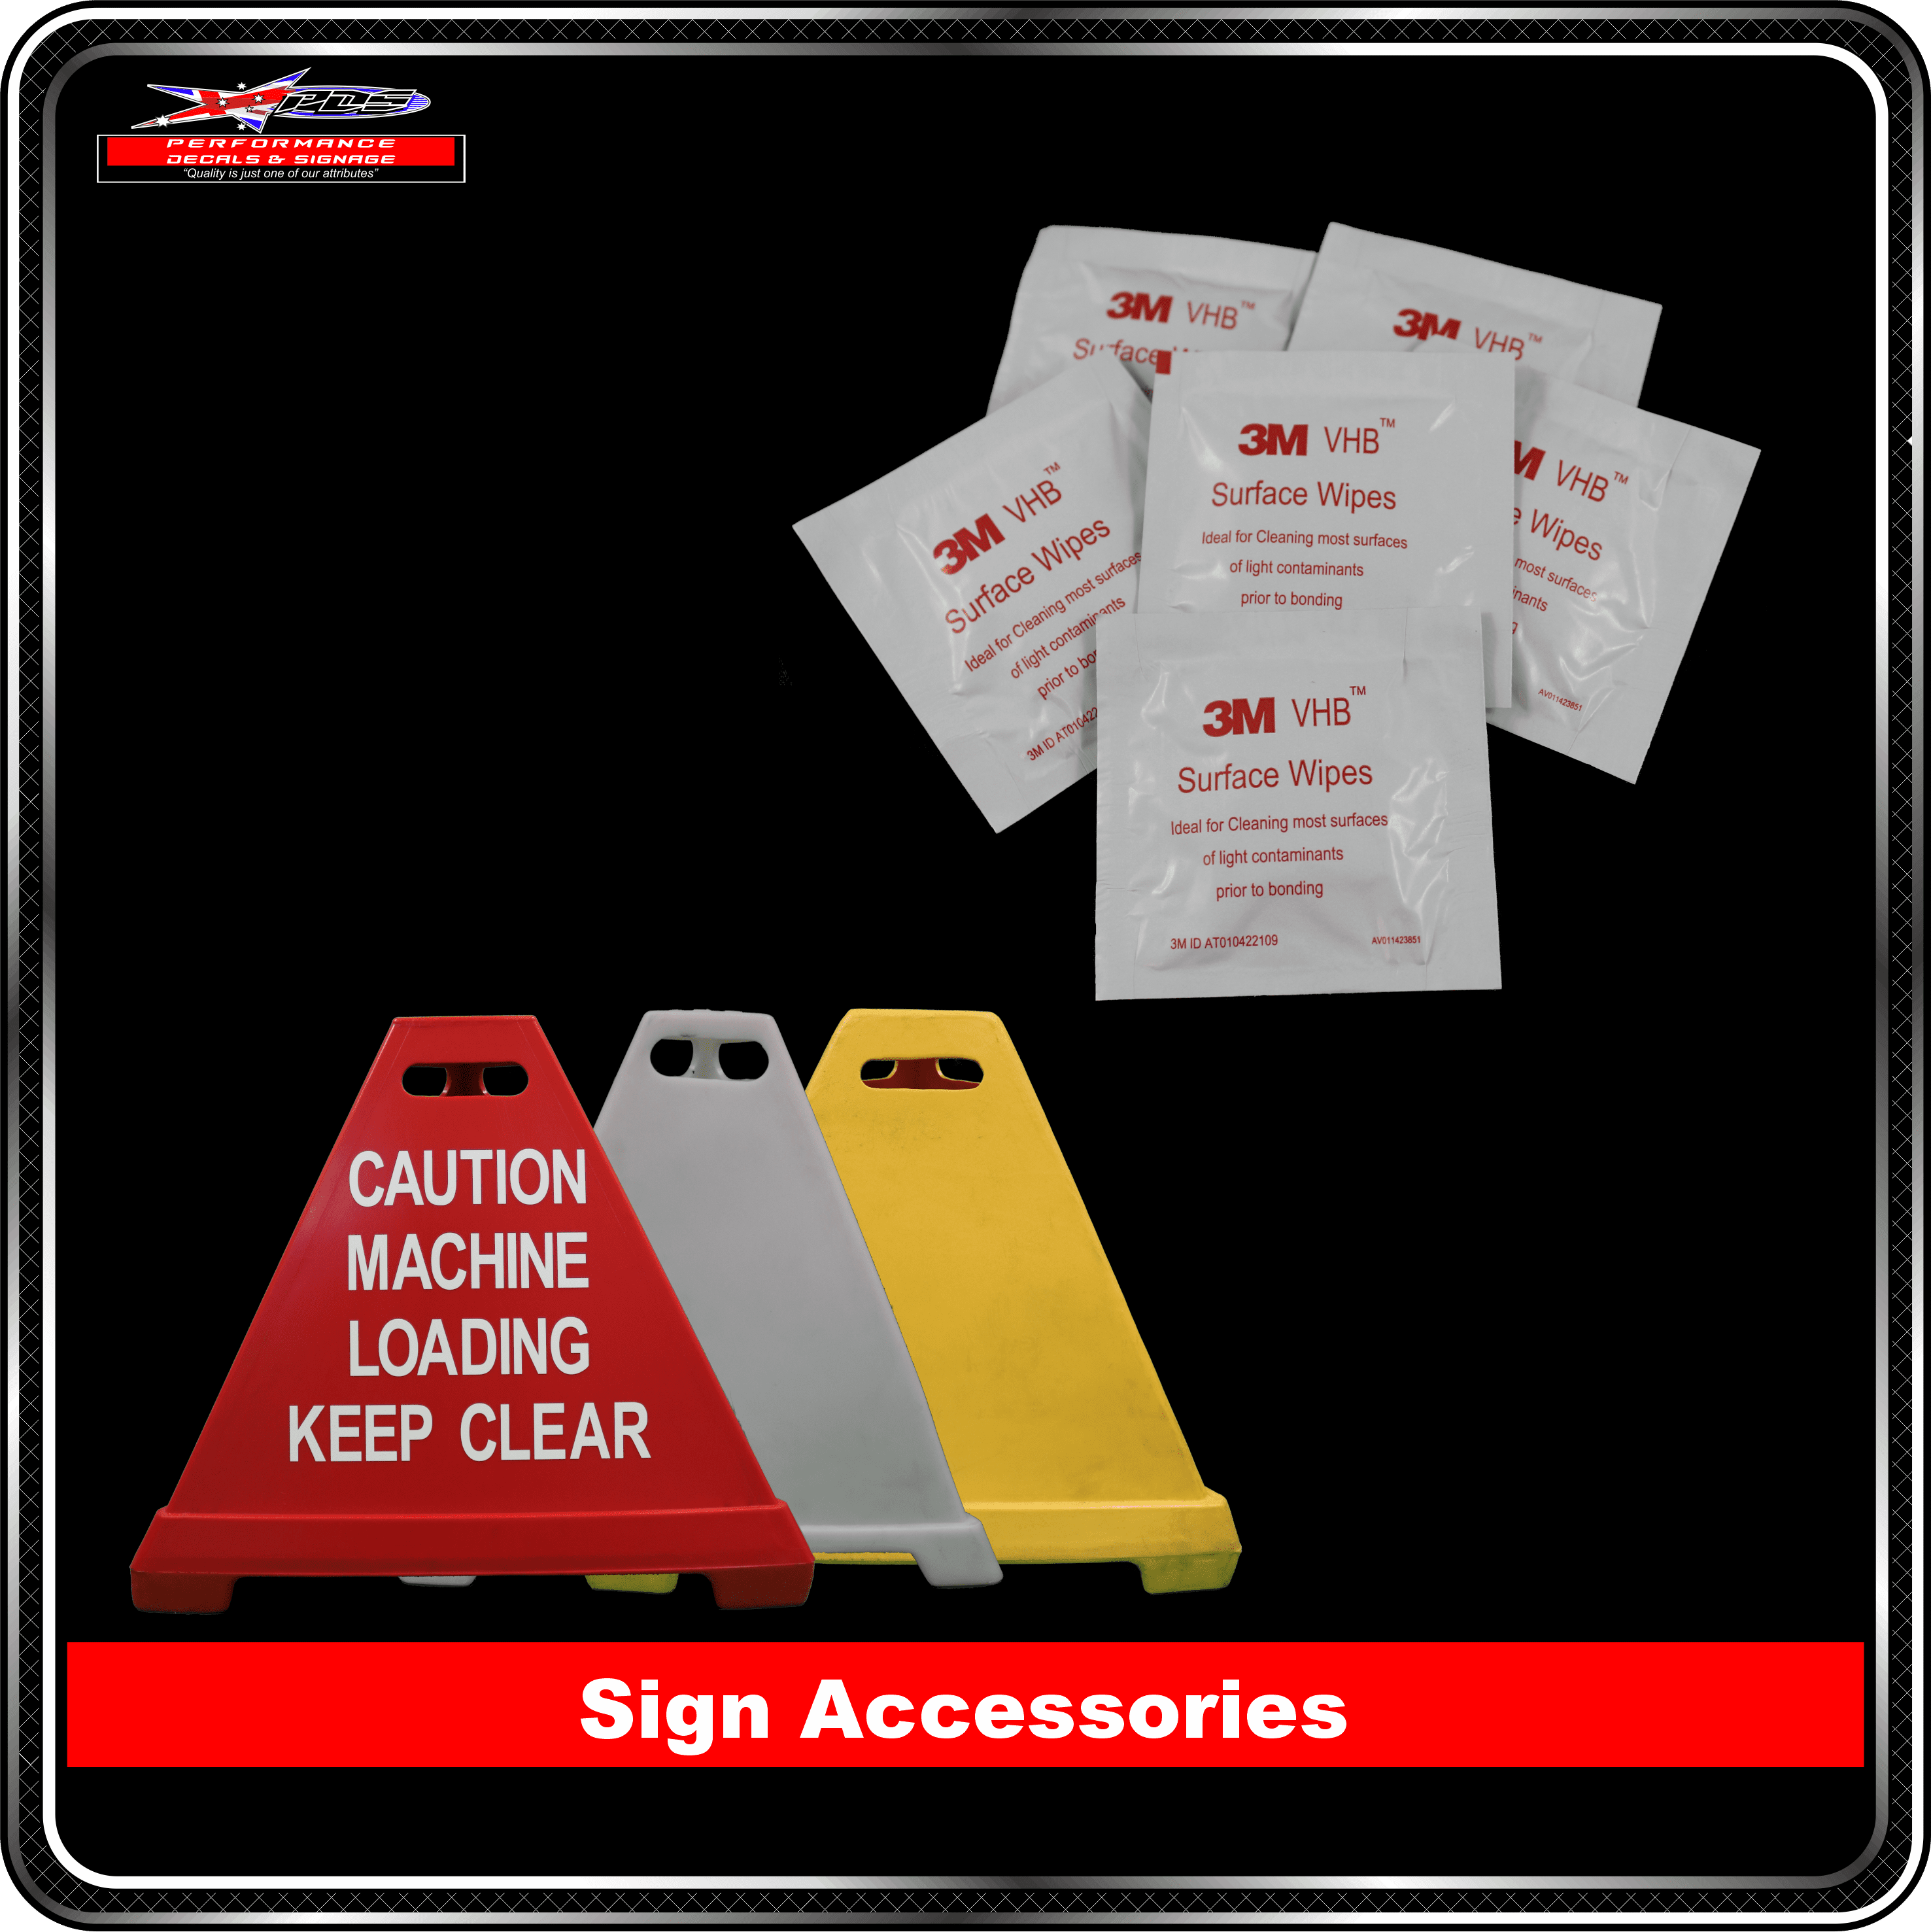 Sign Accessories